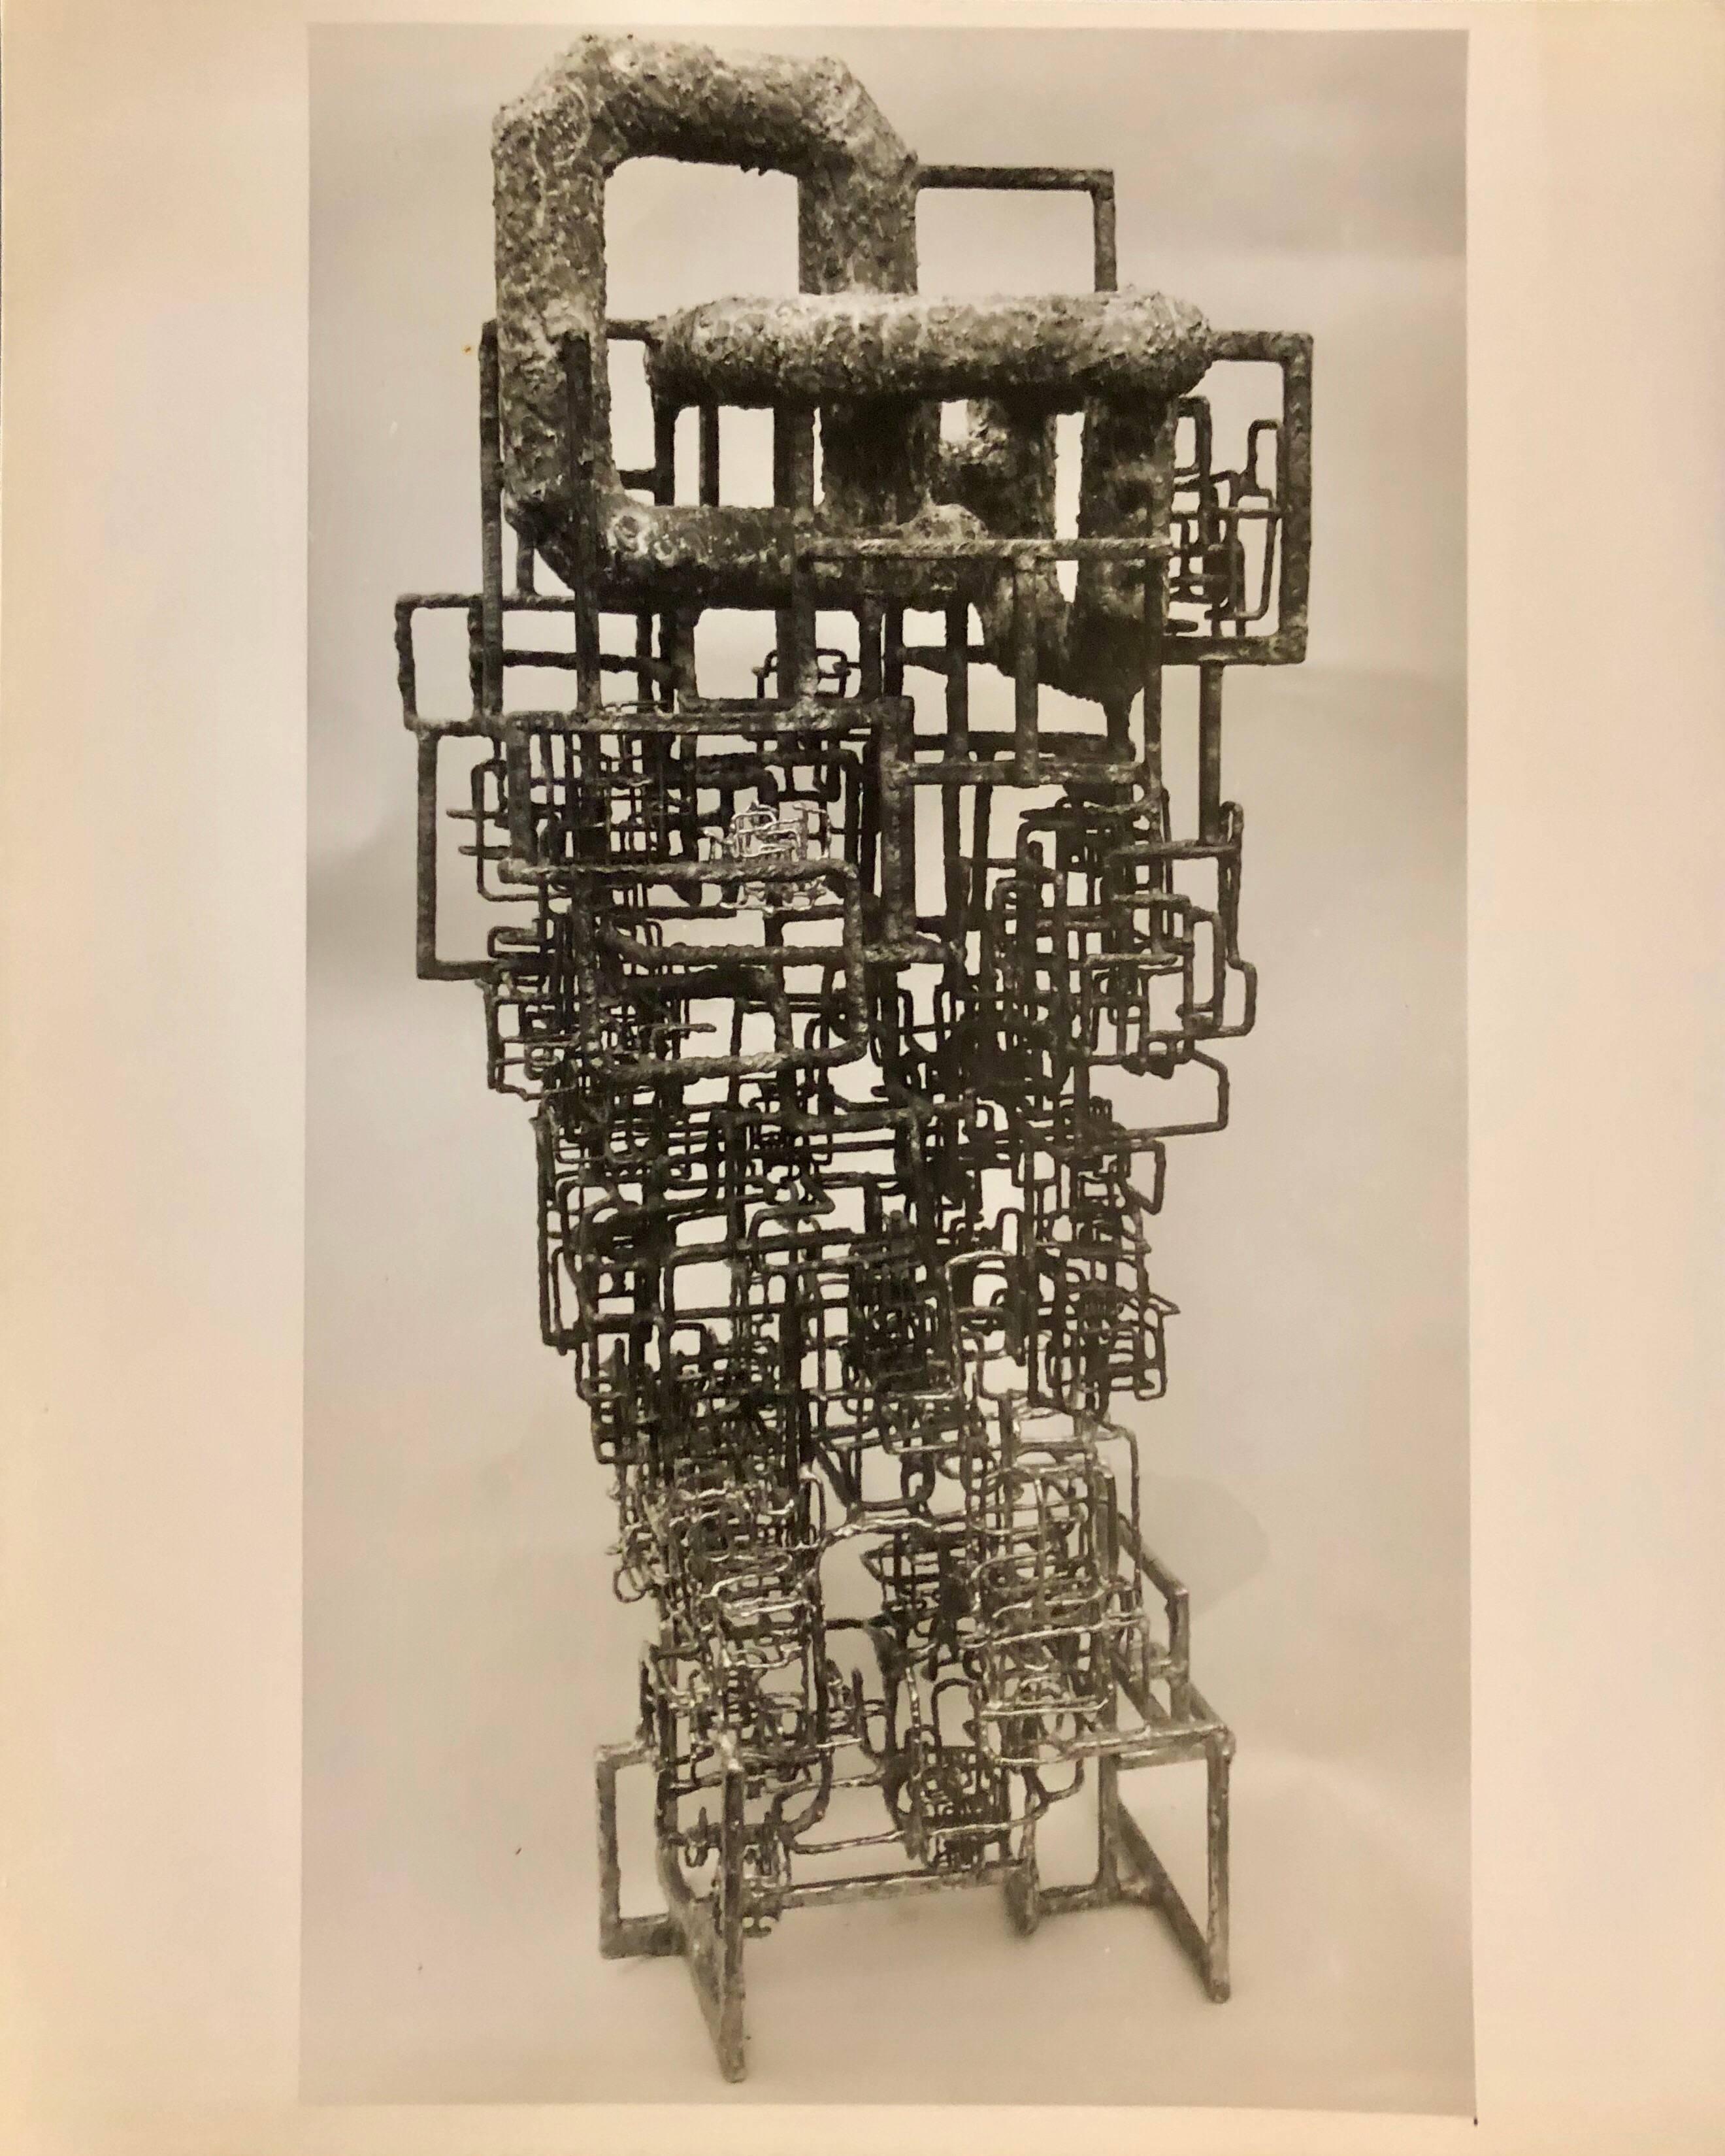 Unknown Abstract Photograph - Vintage Silver Gelatin Photo of Ibram Lassaw Modernist Sculpture (Photograph)